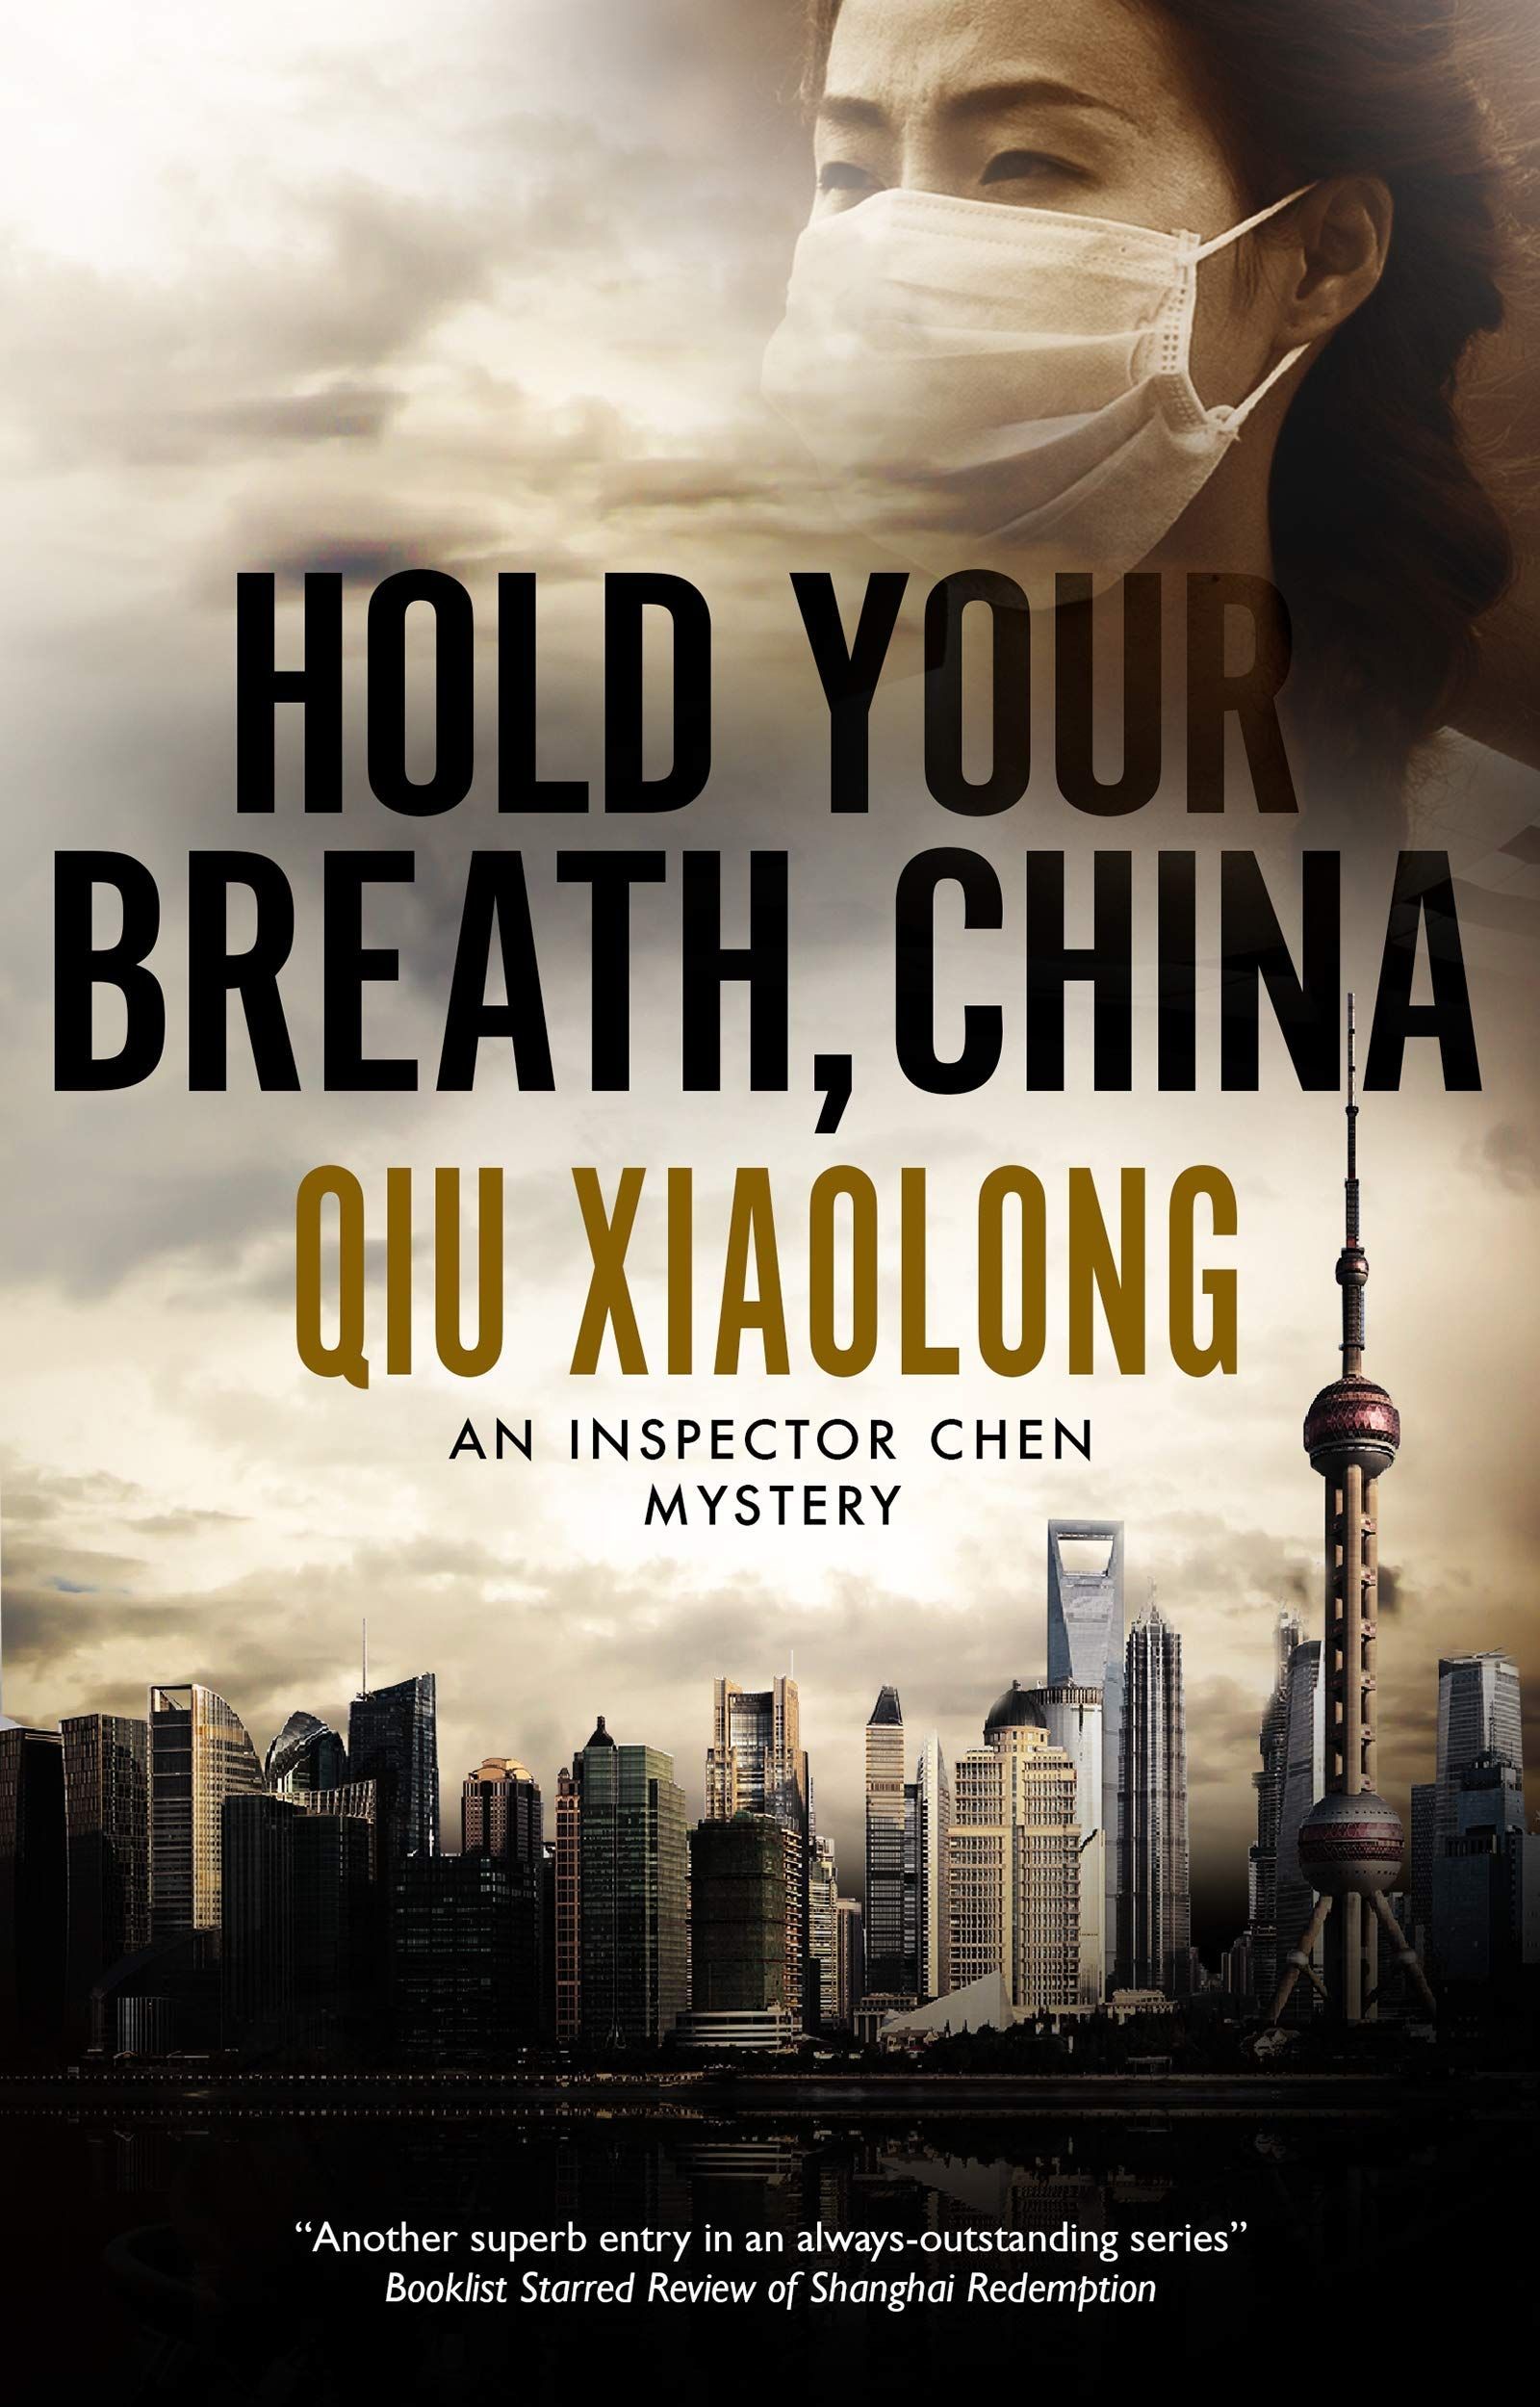 Contamination: On Qiu Xiaolong’s Inspector Chen Mysteries